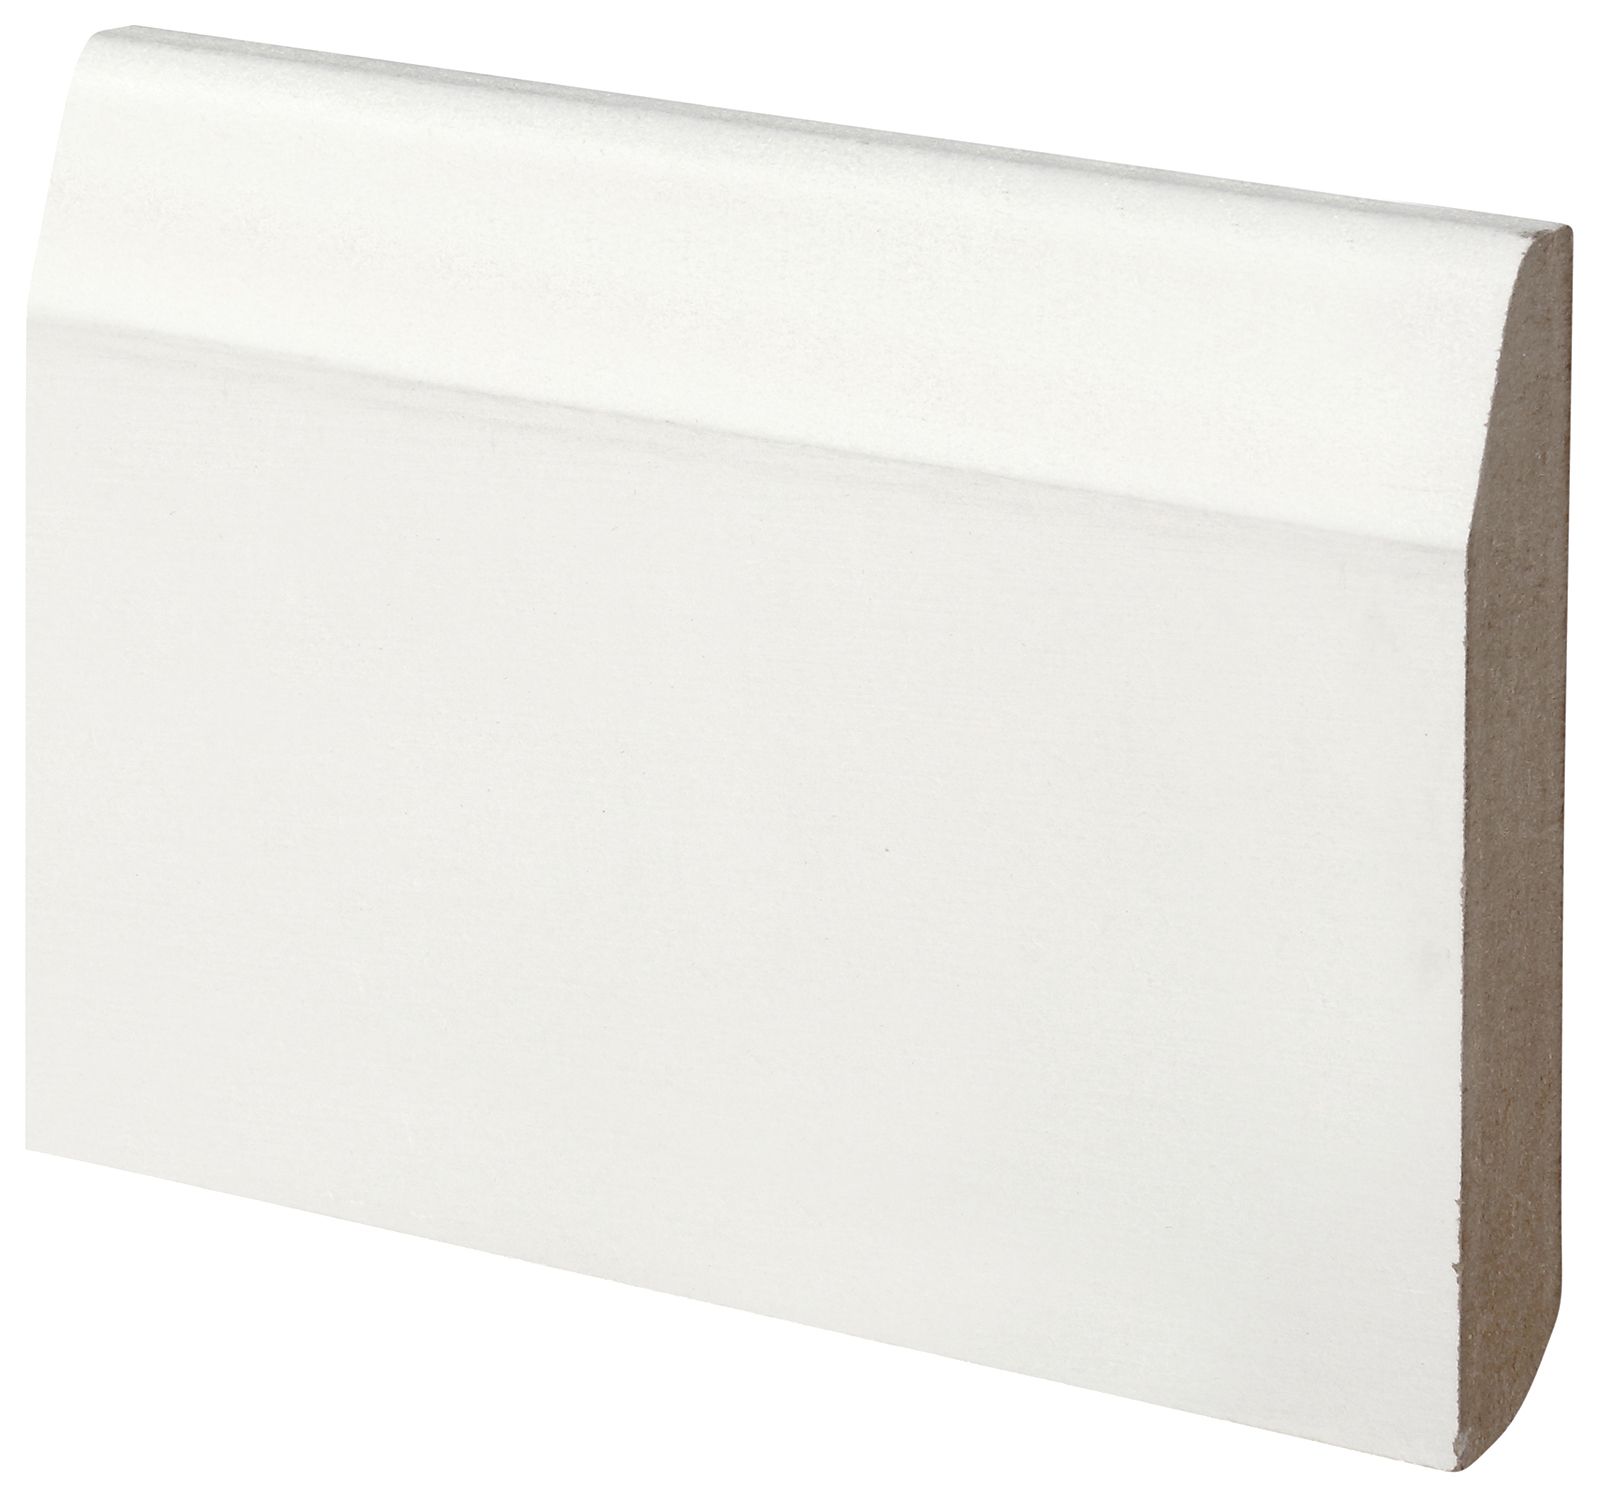 Image of Wickes Dual Purpose Chamfered/Bullnose Primed MDF Skirting - 14.5 x 94 x 3660mm - Pack Of 2